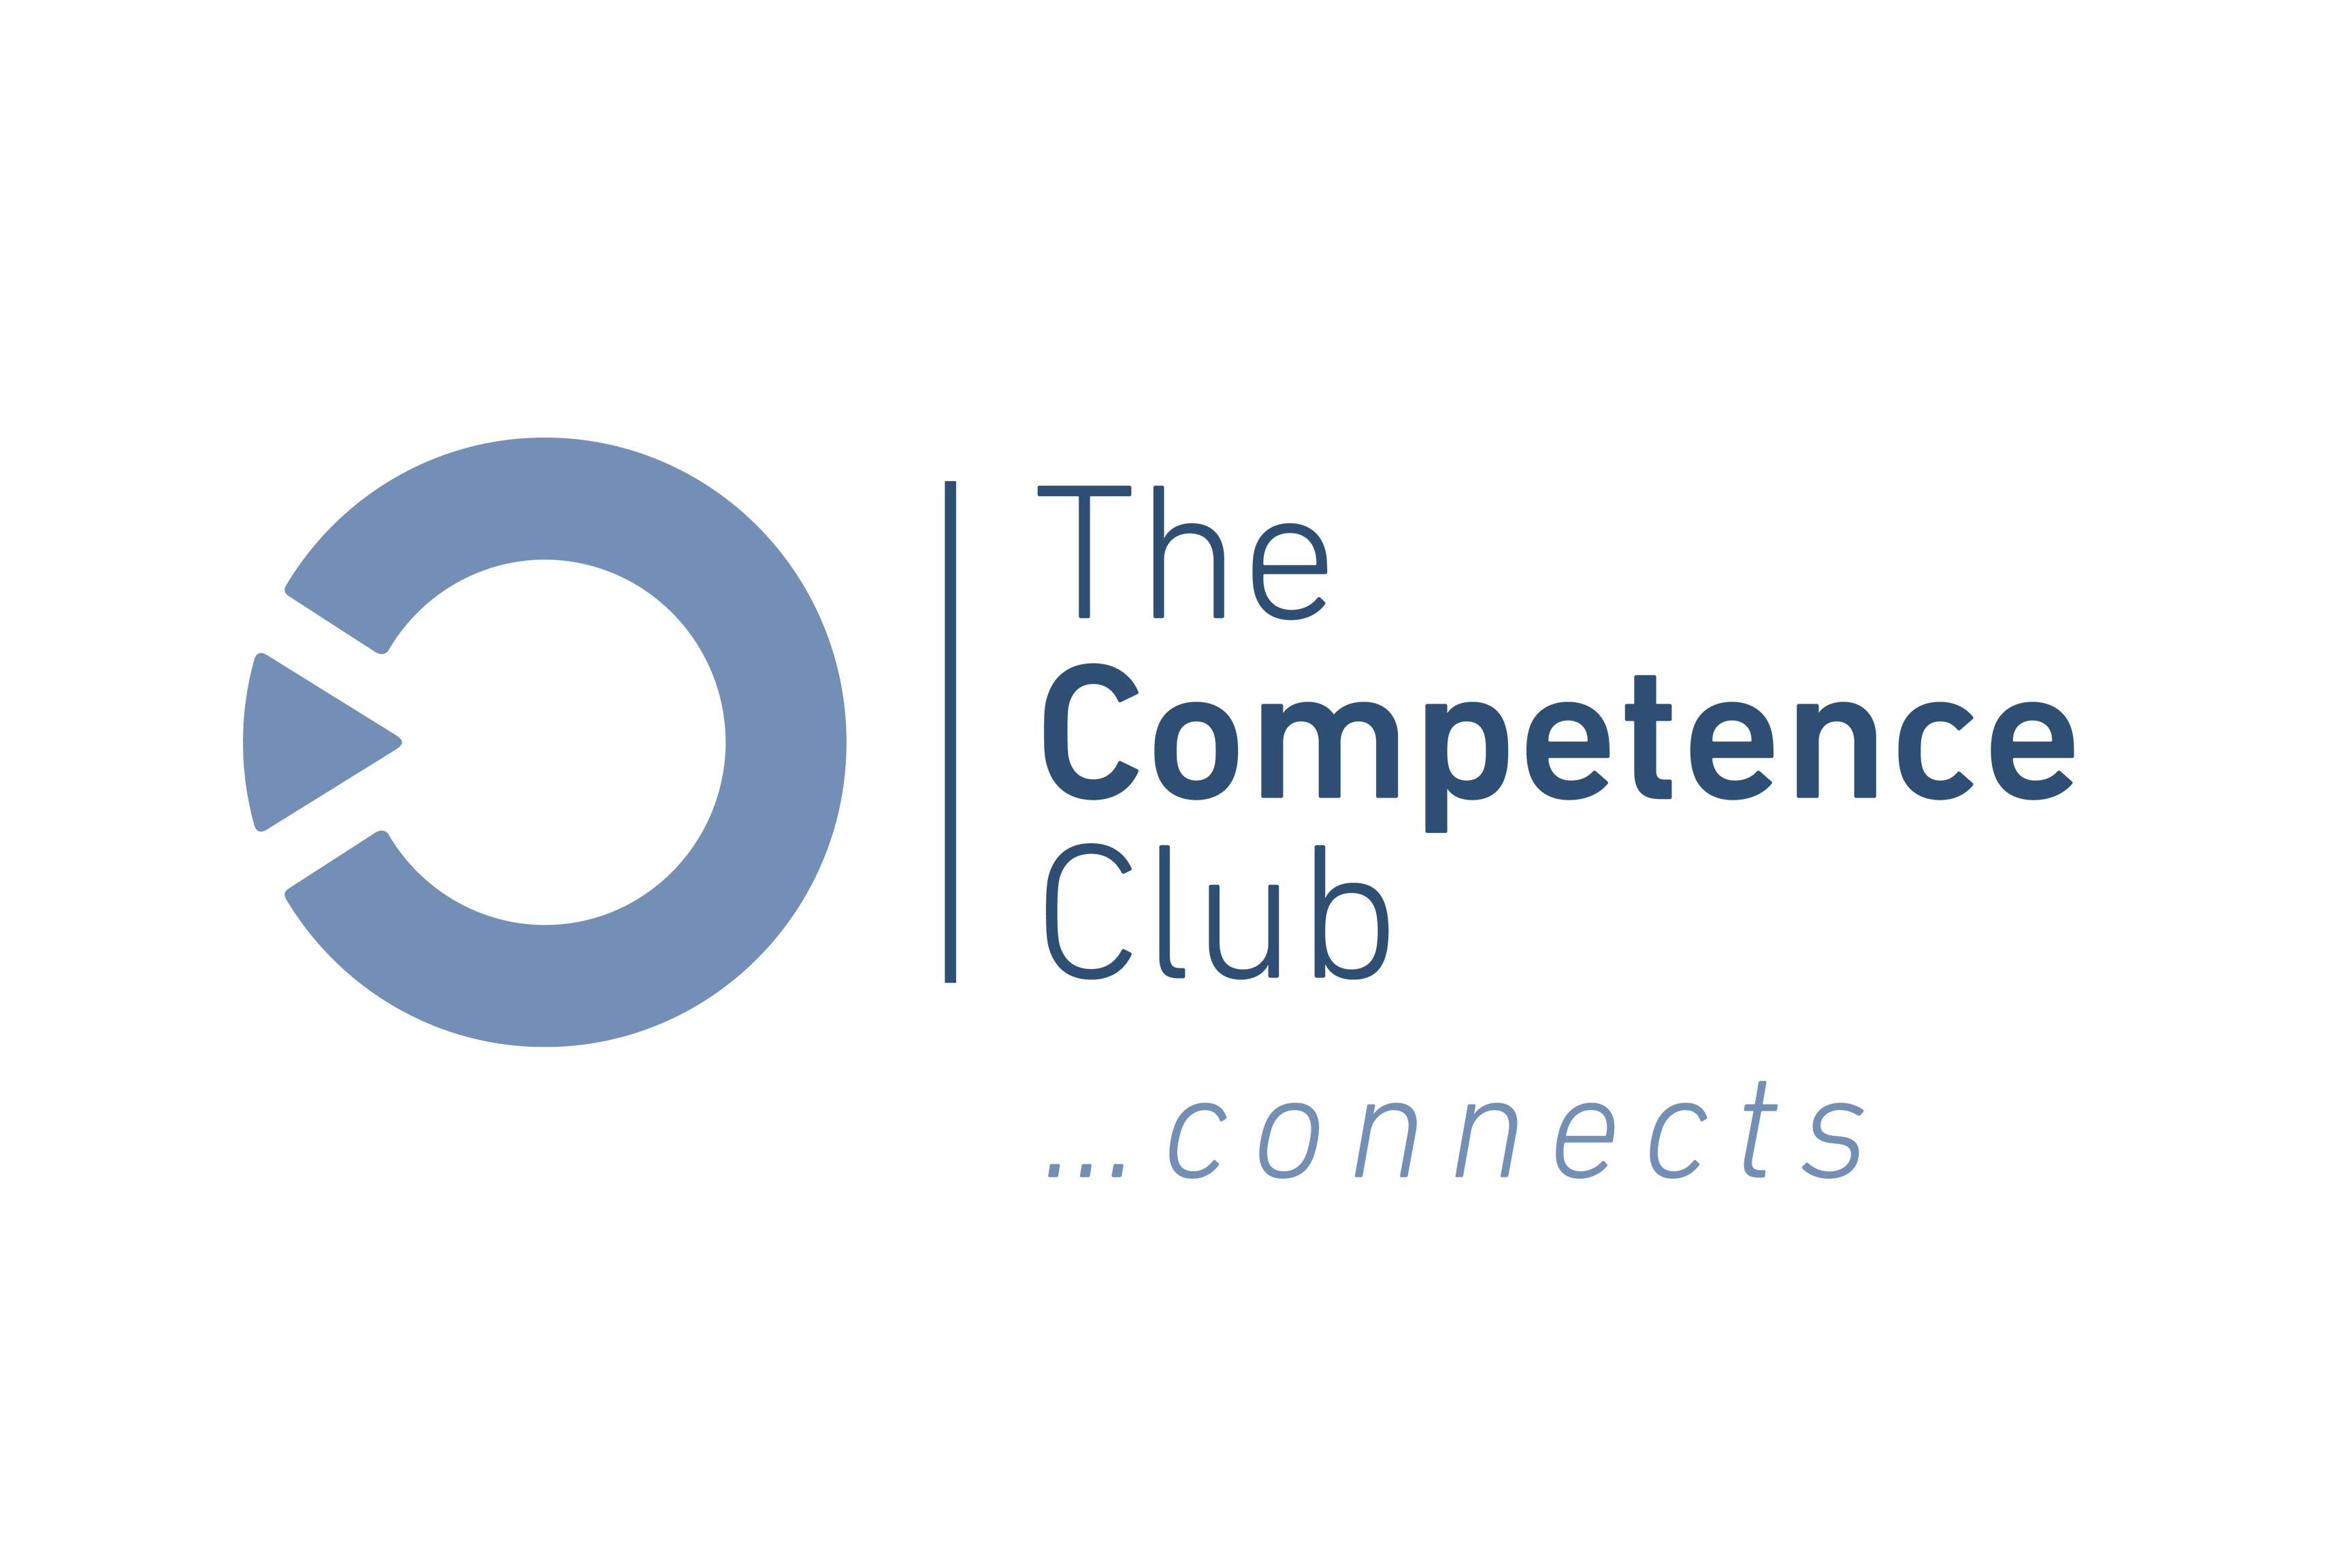 Logo of Competence Club with ROSEN loop on the left side and a text saying "The Competence Club connects..."